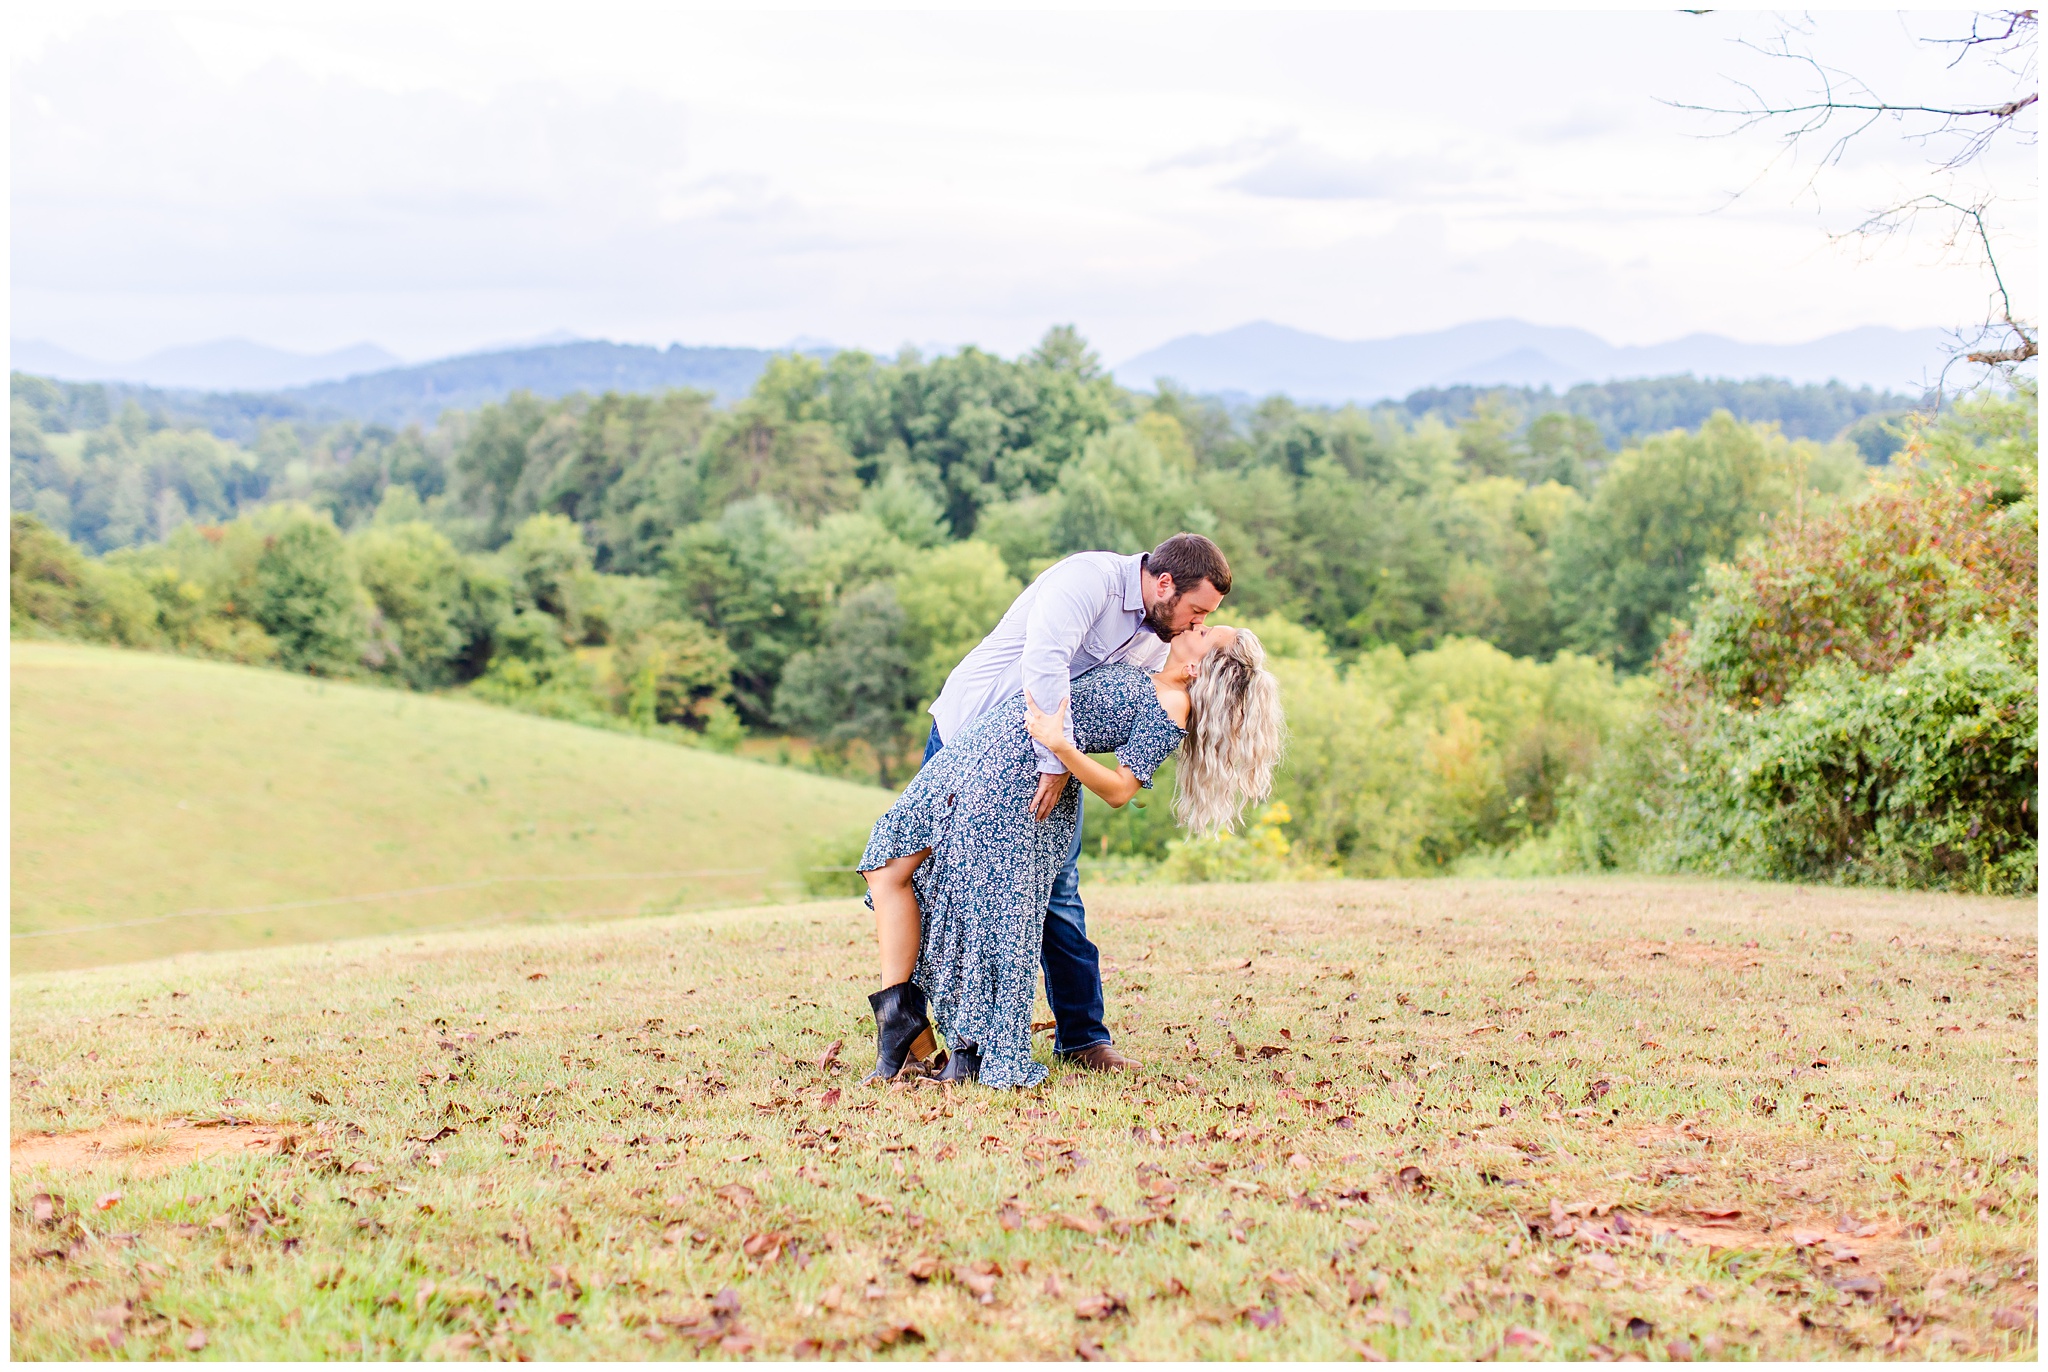 couple shares a dip kiss on a hillside with mountains behind them for photo shoot